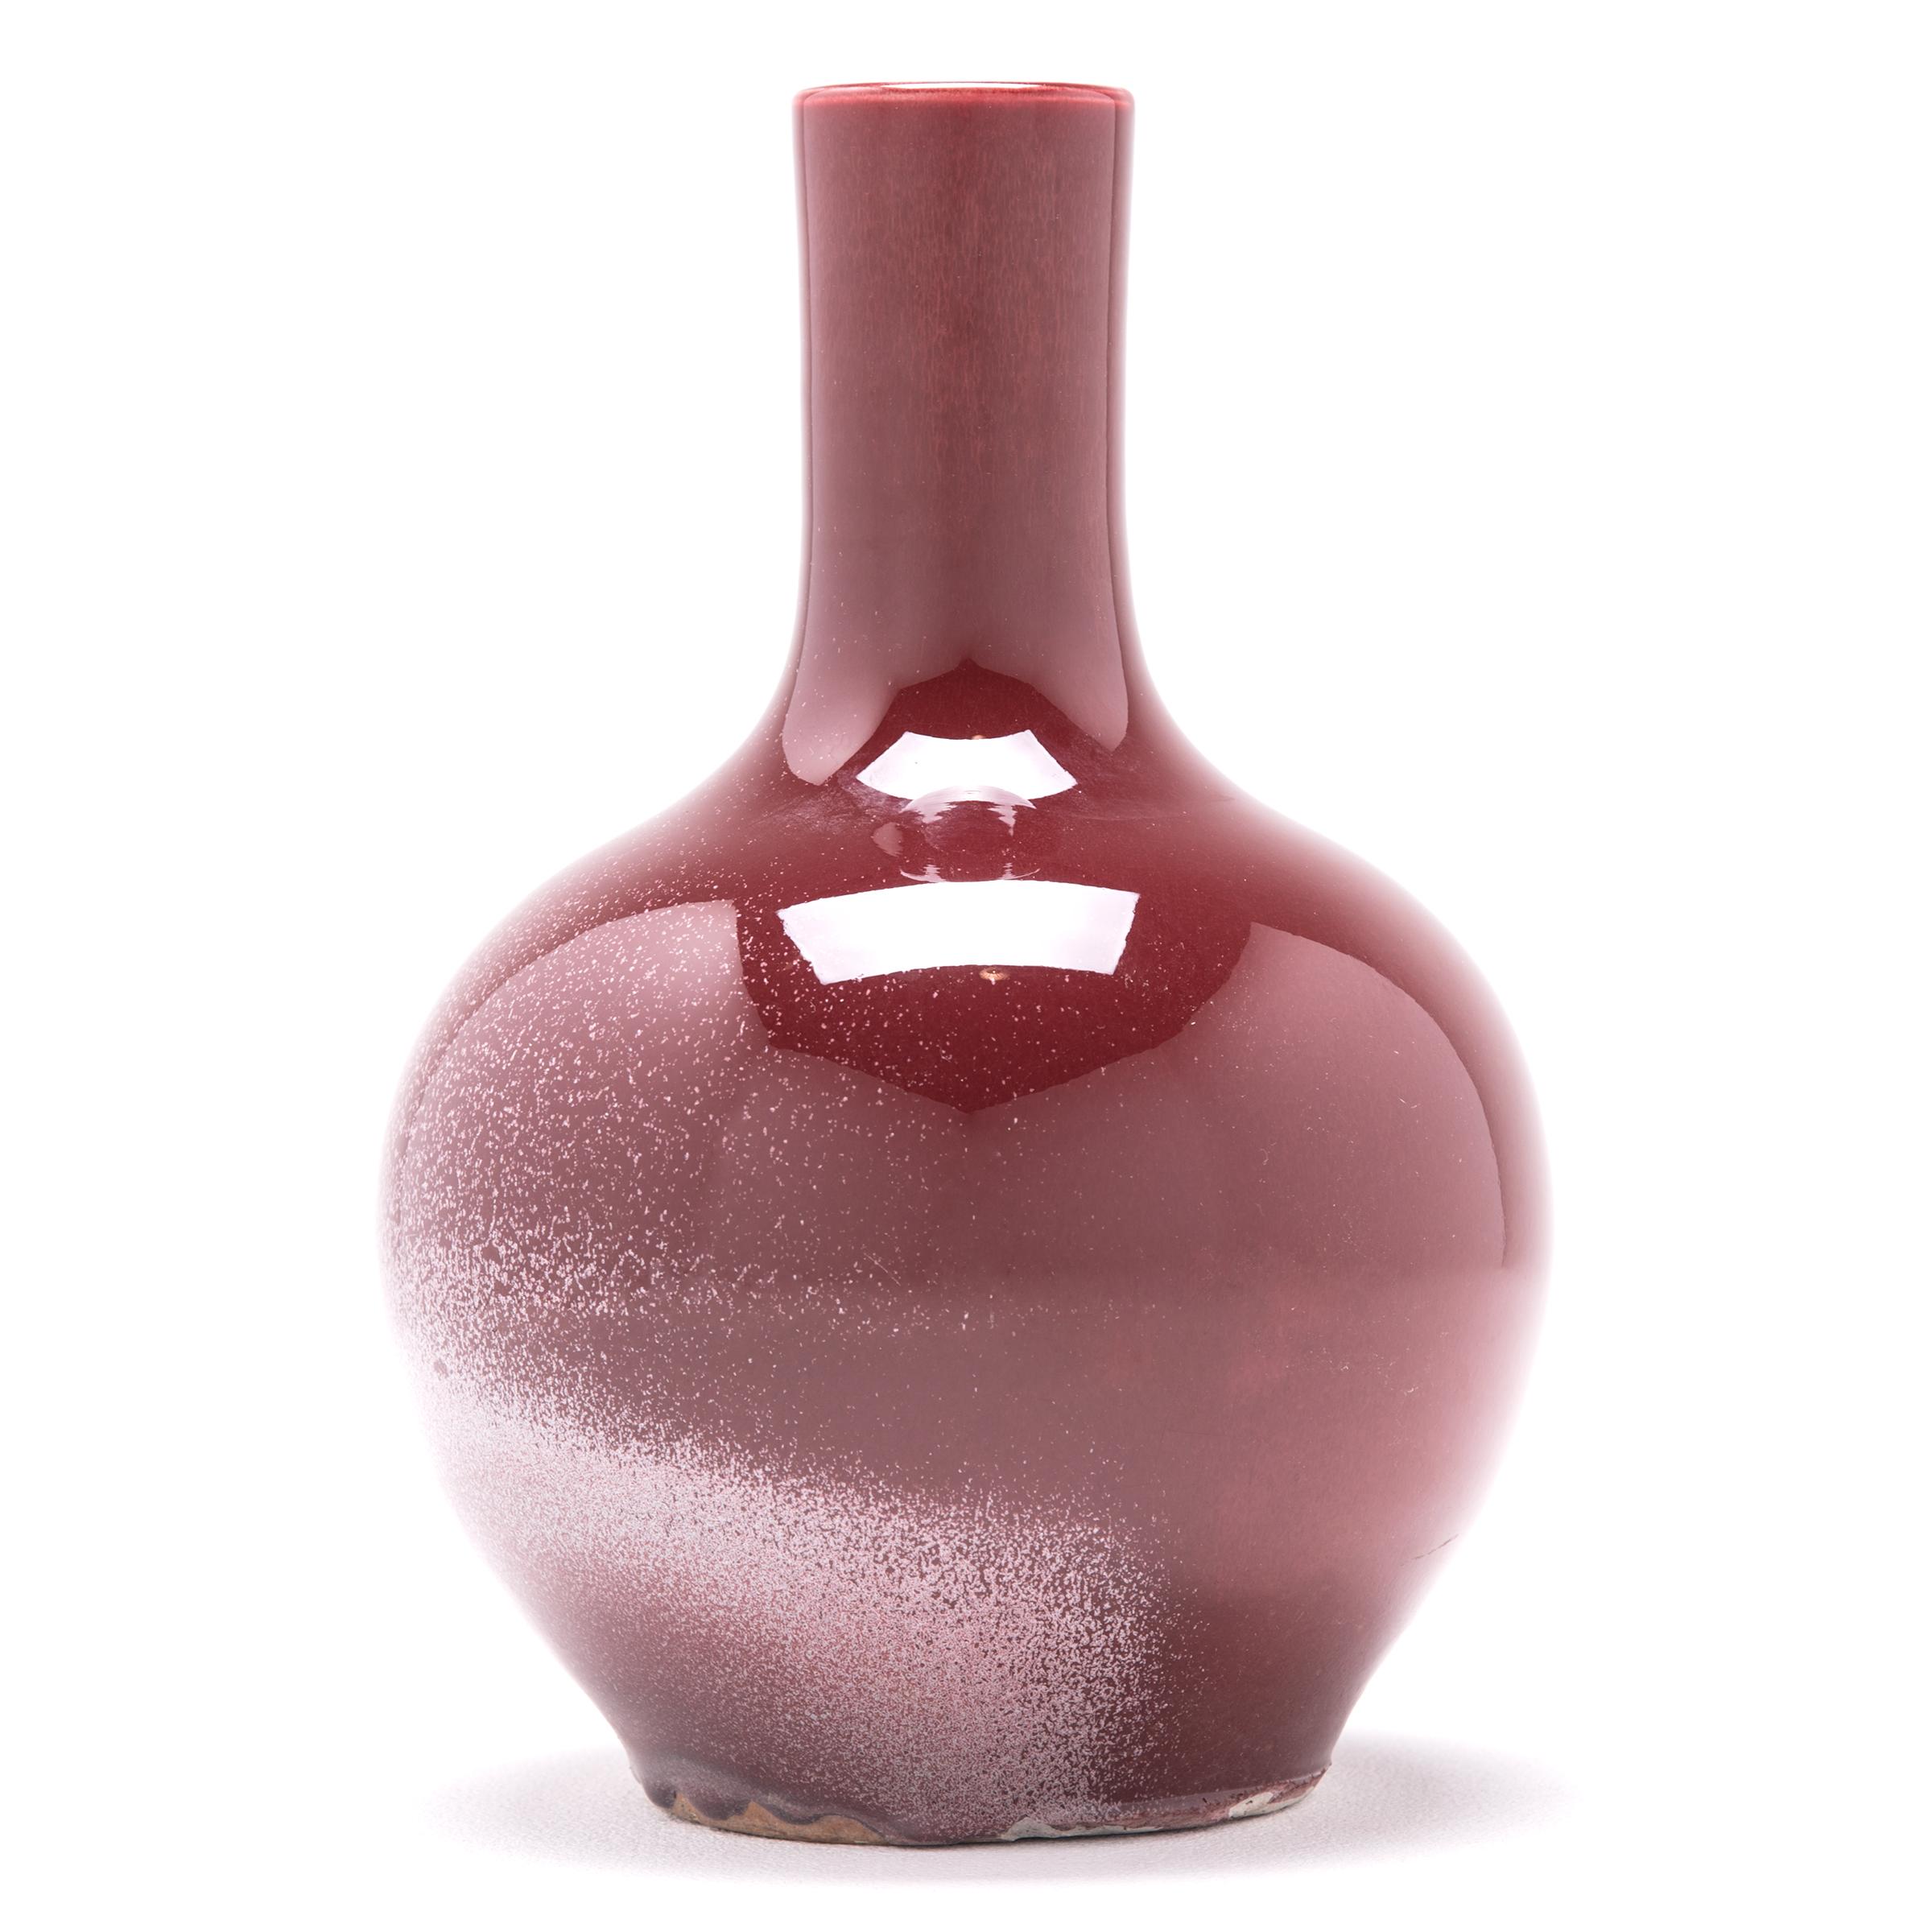 A simple and modern shape defines this gooseneck vase. The vase's deep, rich red glaze is often called 